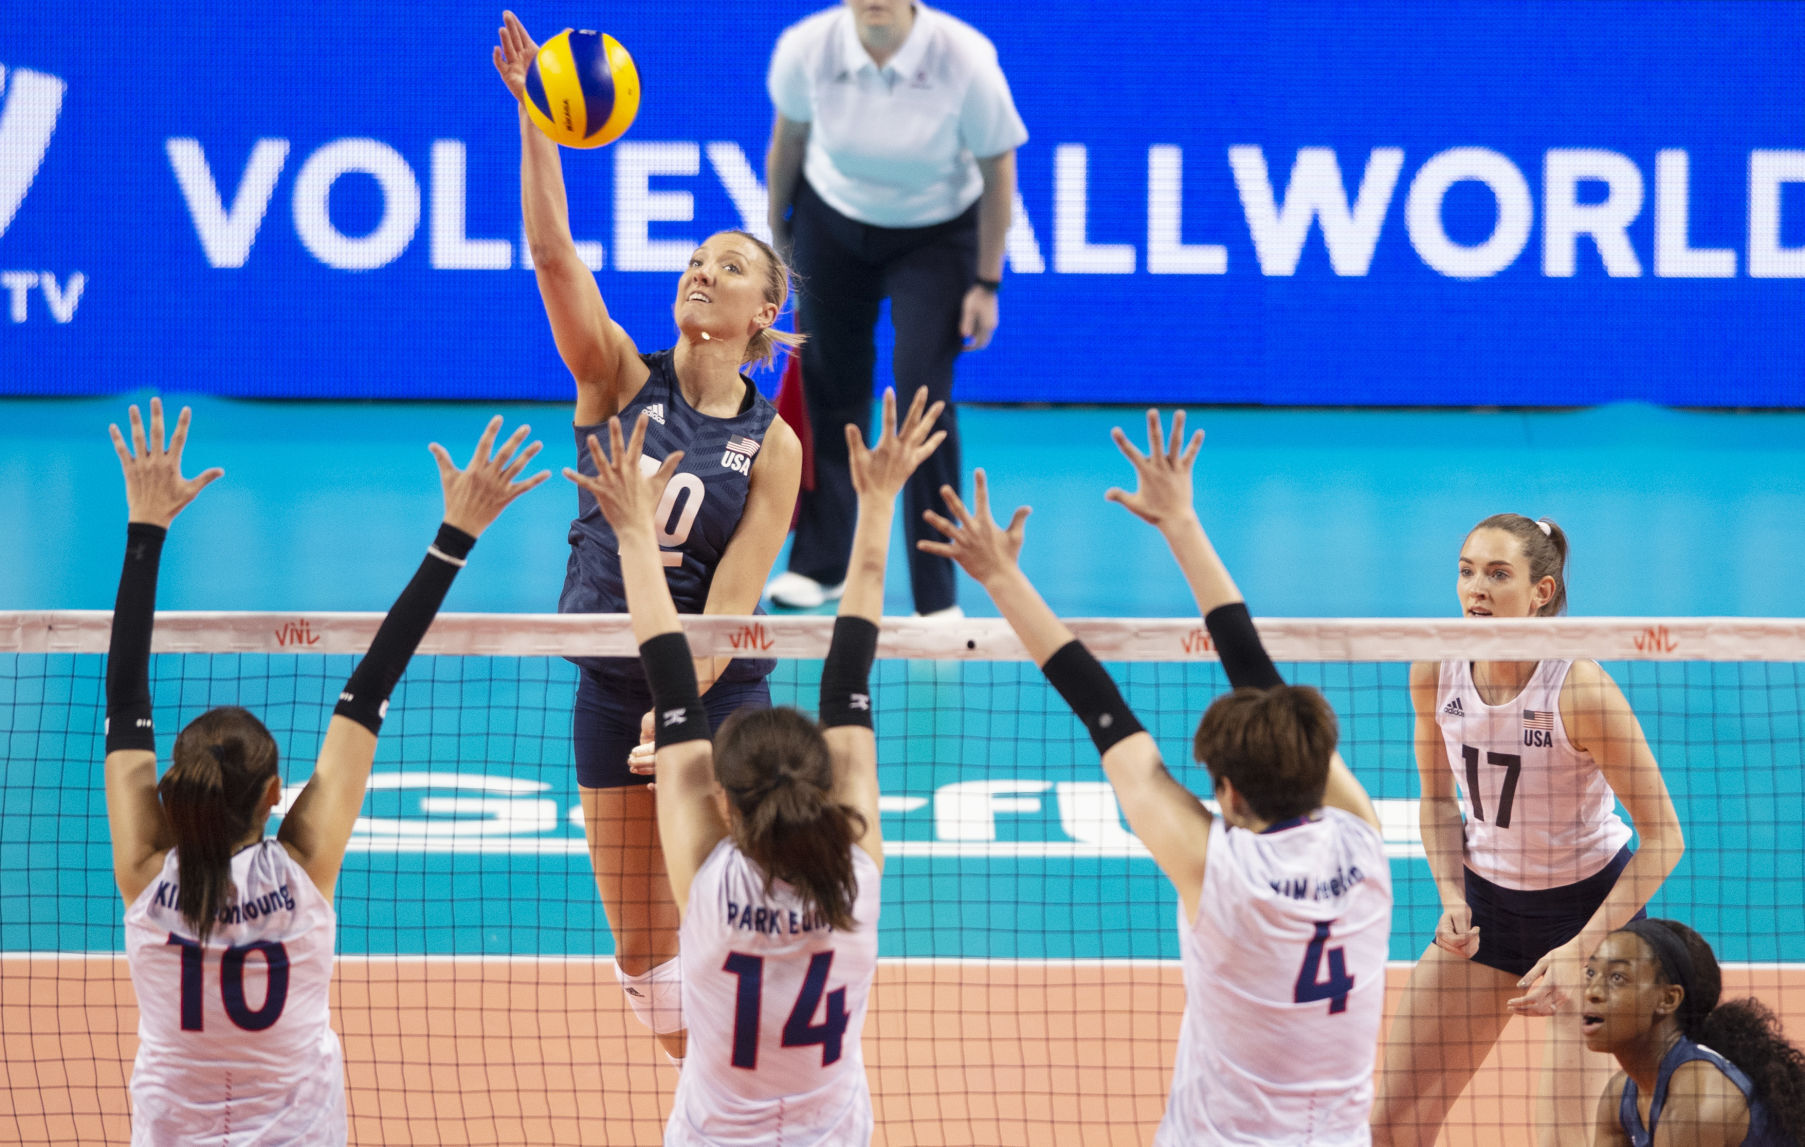 Three ex-Huskers, including Jordan Larson, make roster for US womens national volleyball team